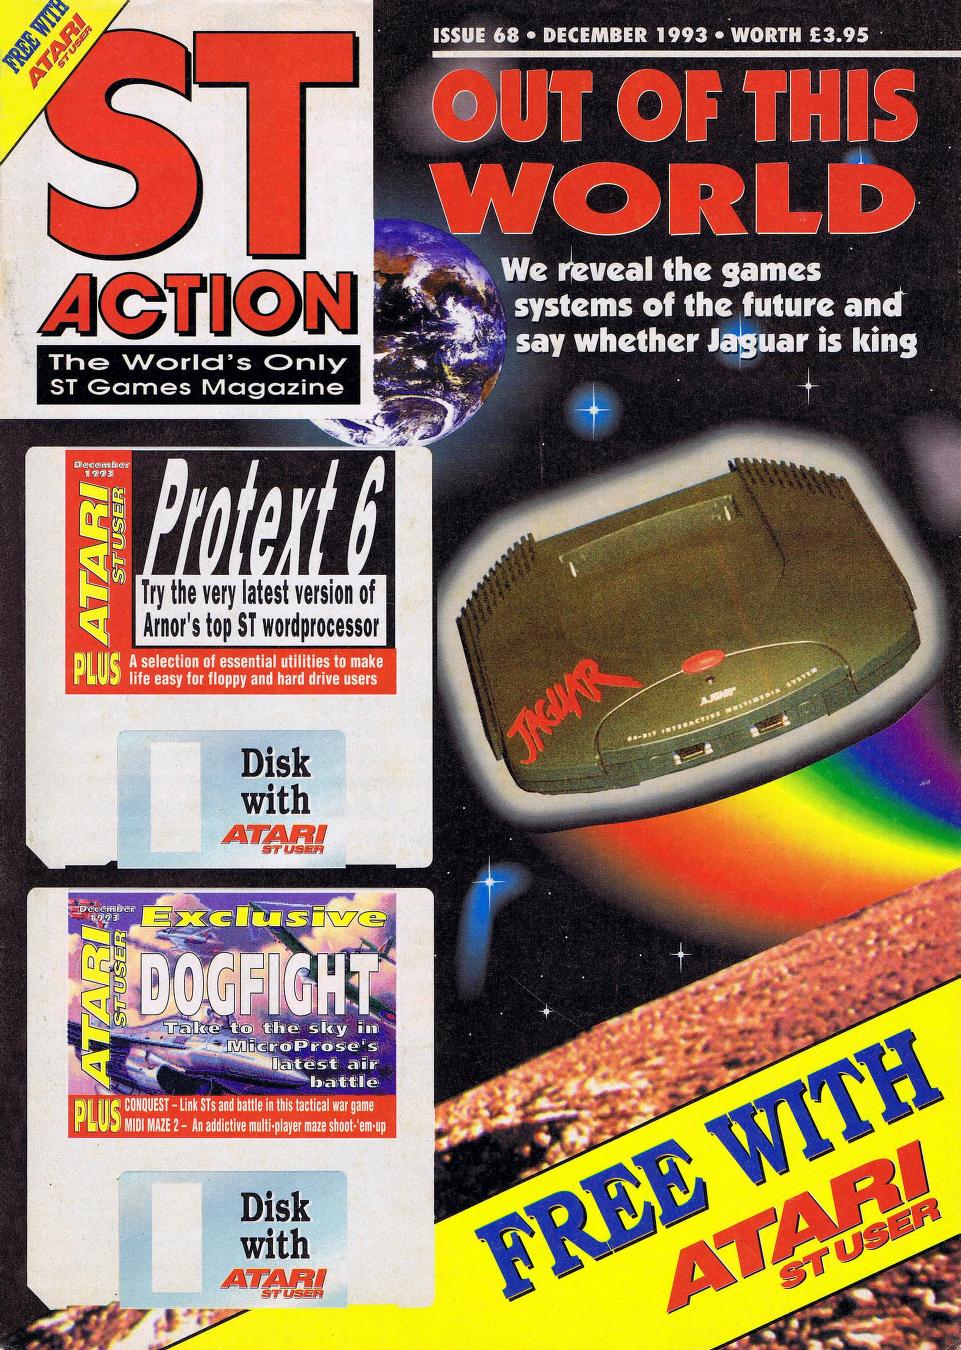 Cover for ST Action 68 (Dec 1993)